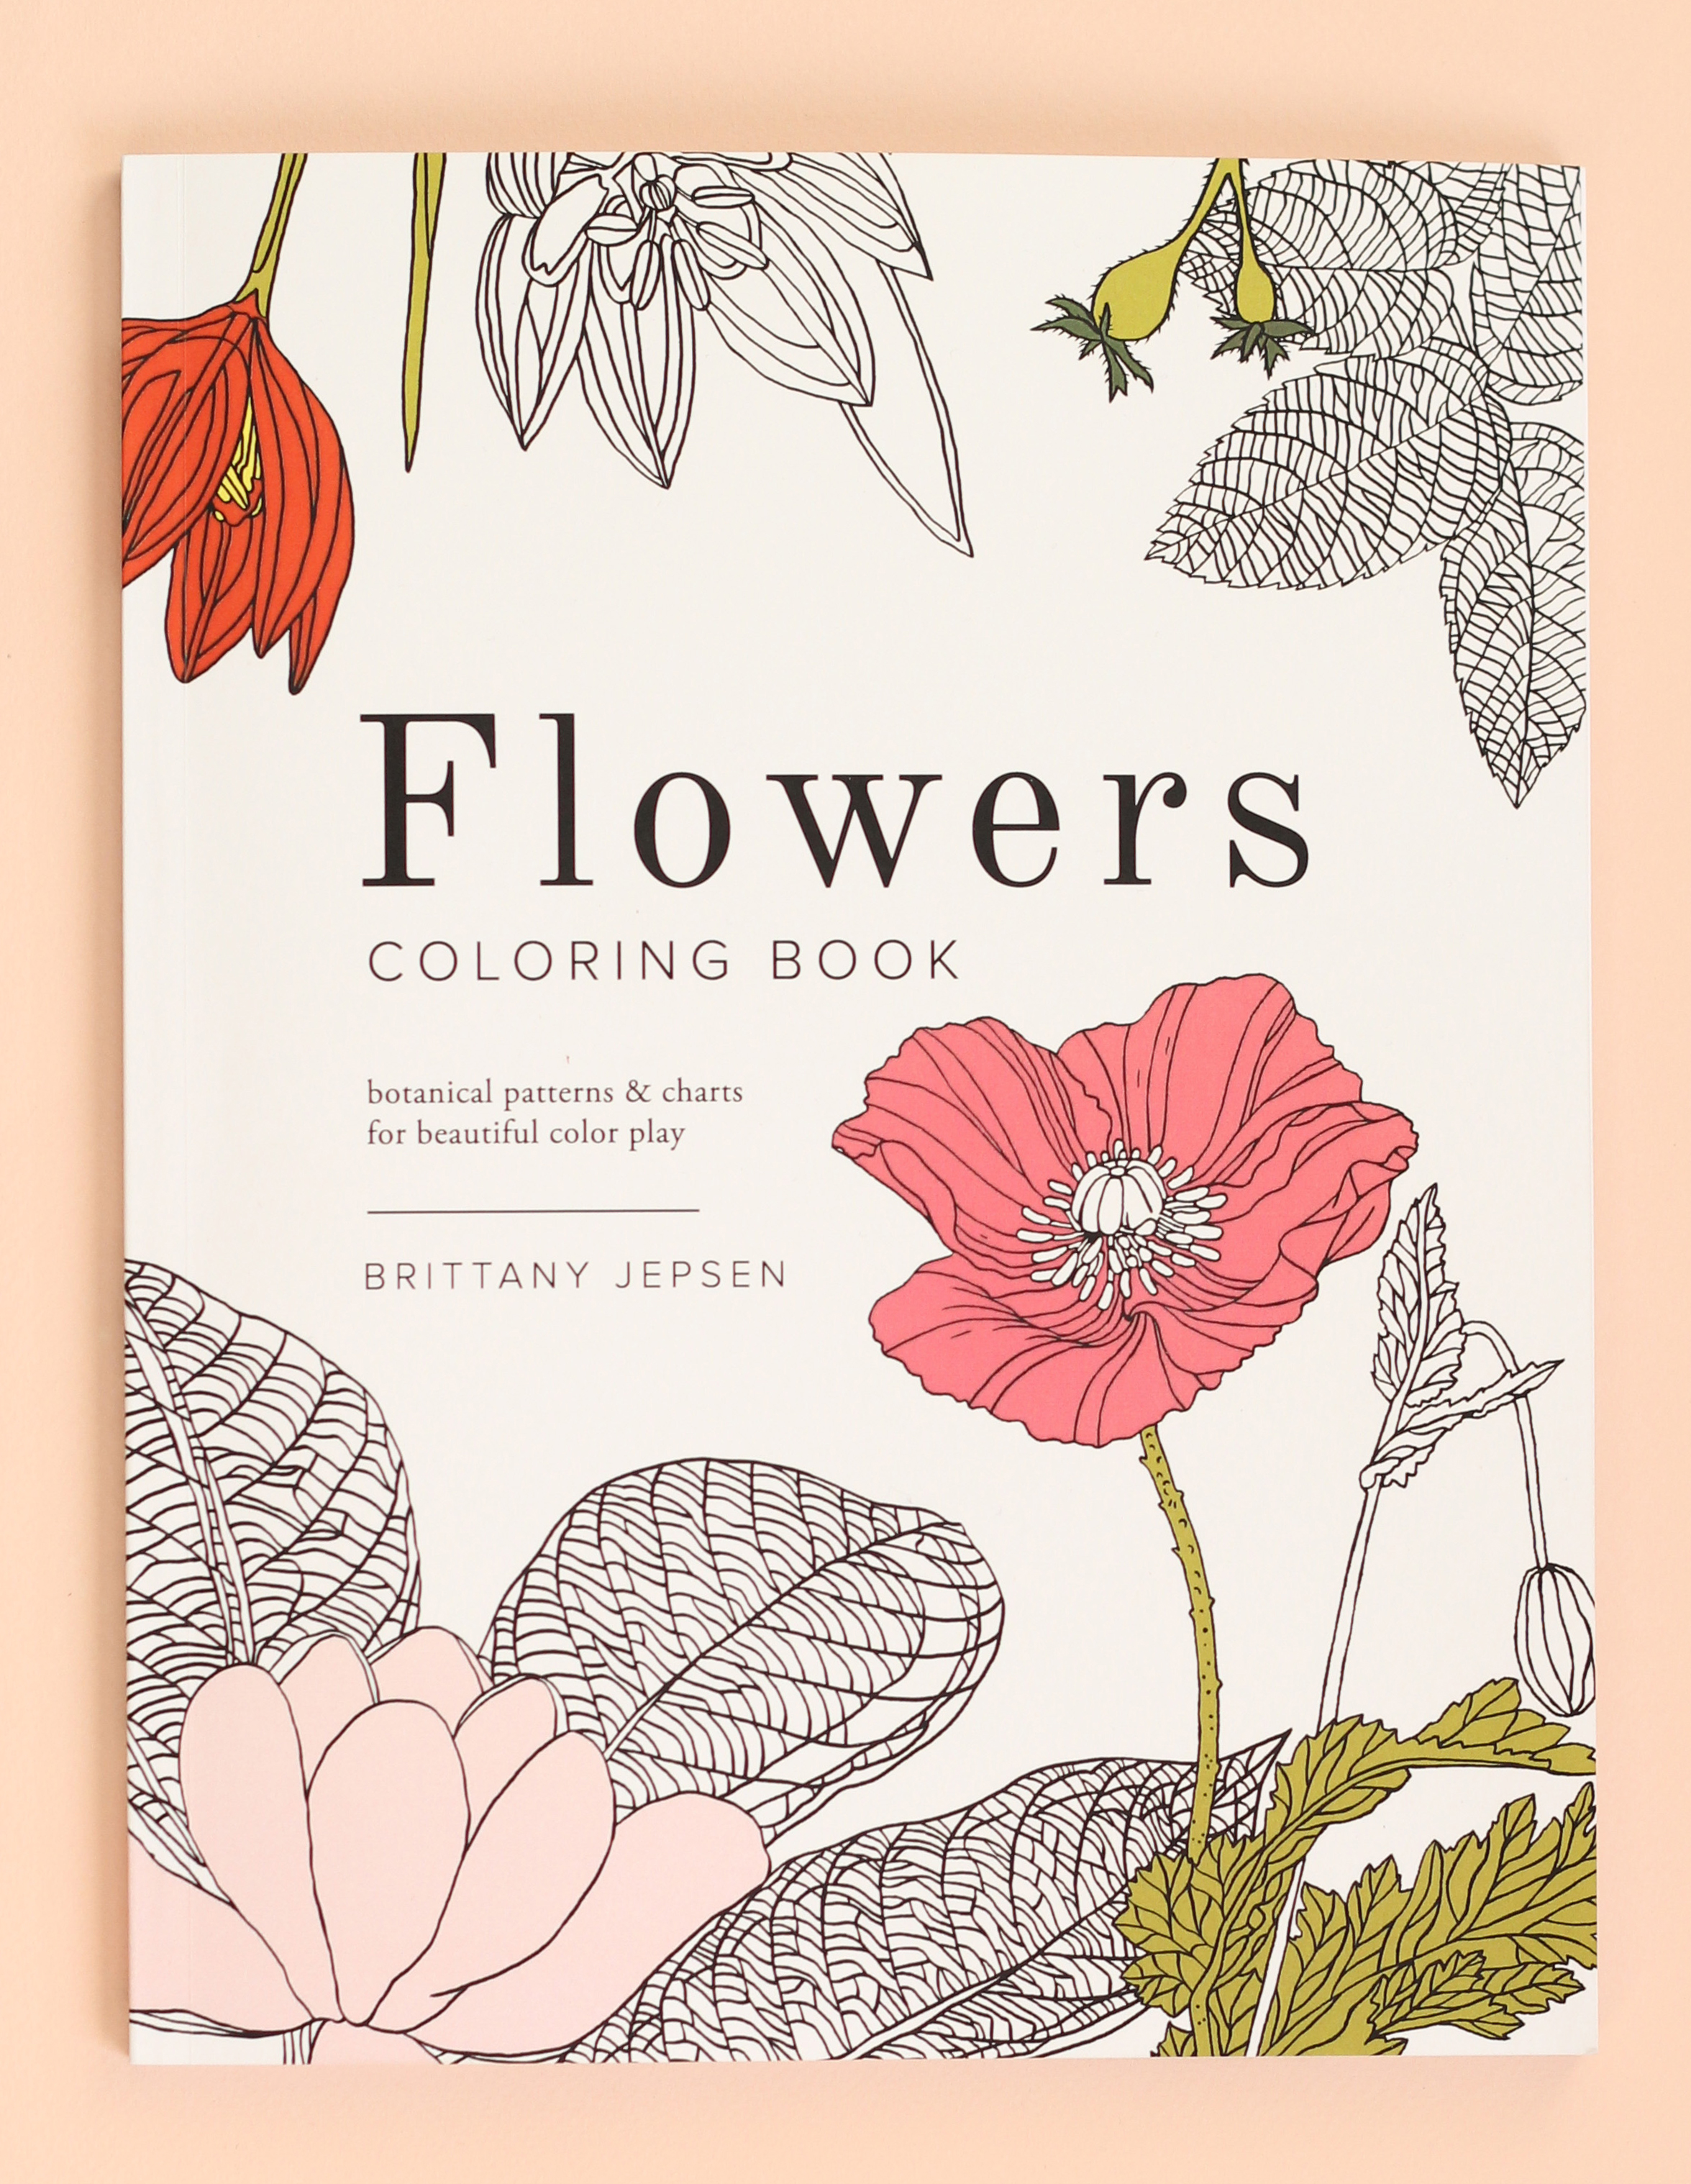 Flowers Coloring Book   The House That Lars Built